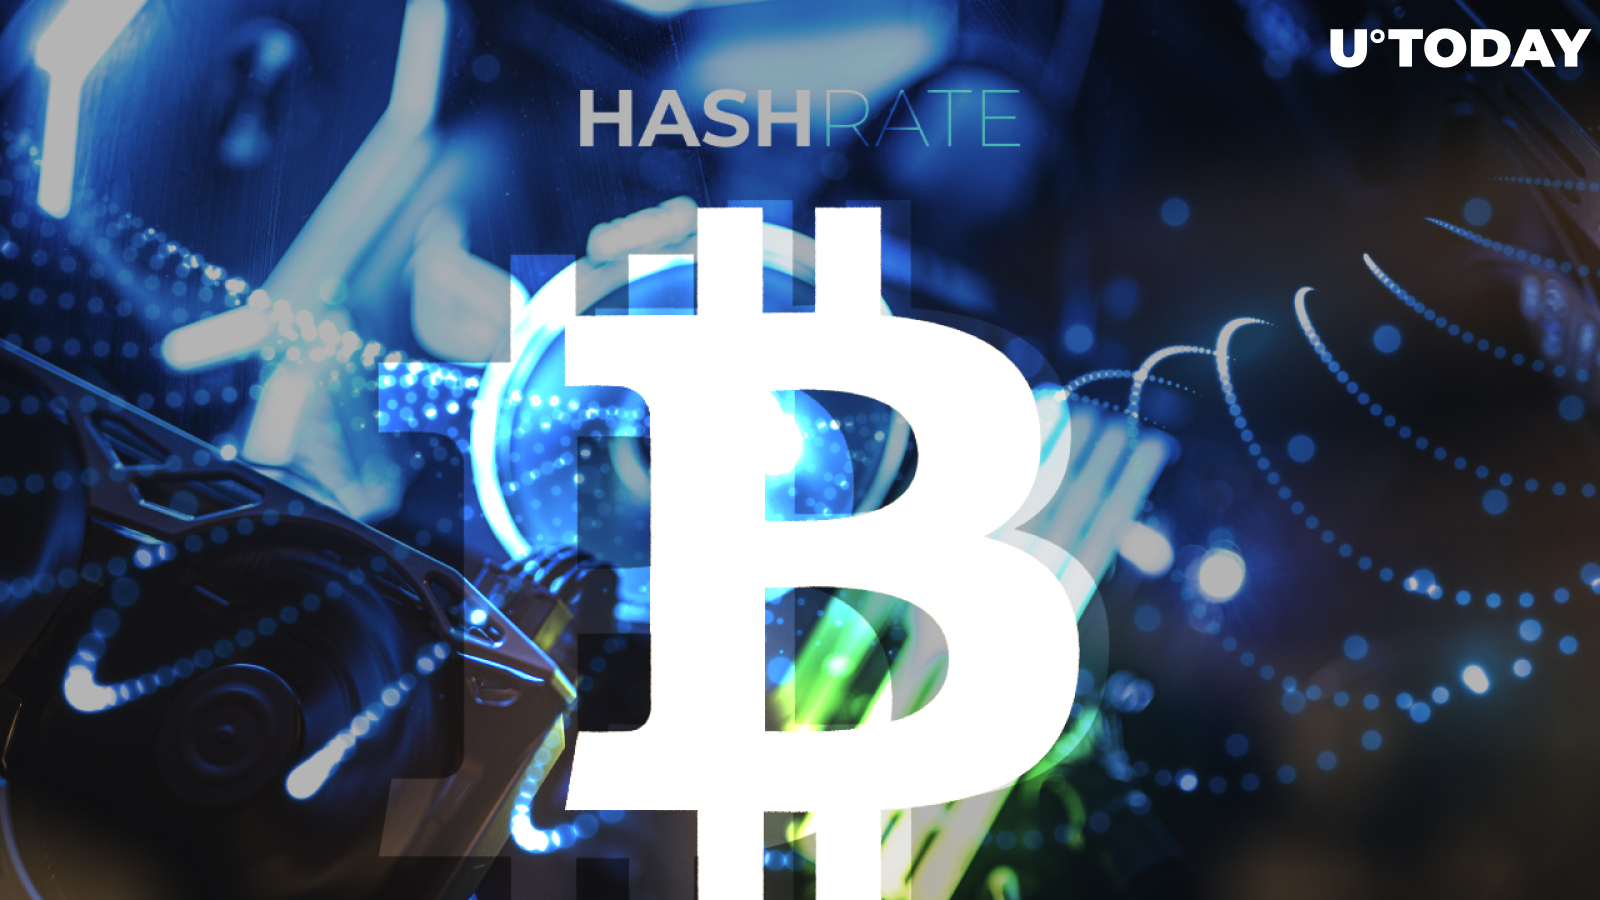 Bitcoin (BTC) Hashrate Prints New ATH. Here's Why This Is Crucial